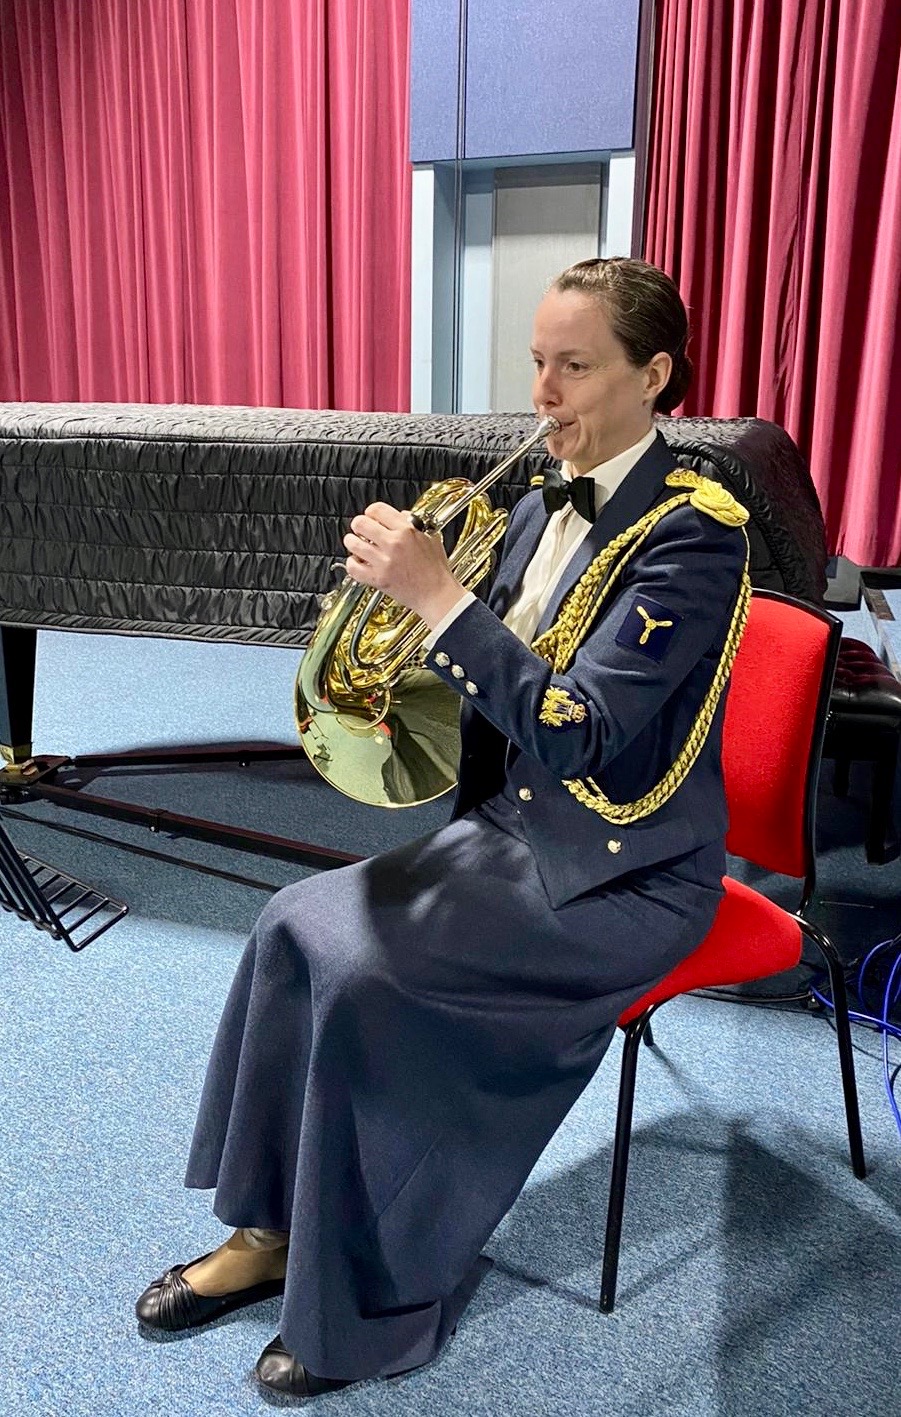 RAF Musician sat on a chair while playing a French Horn.